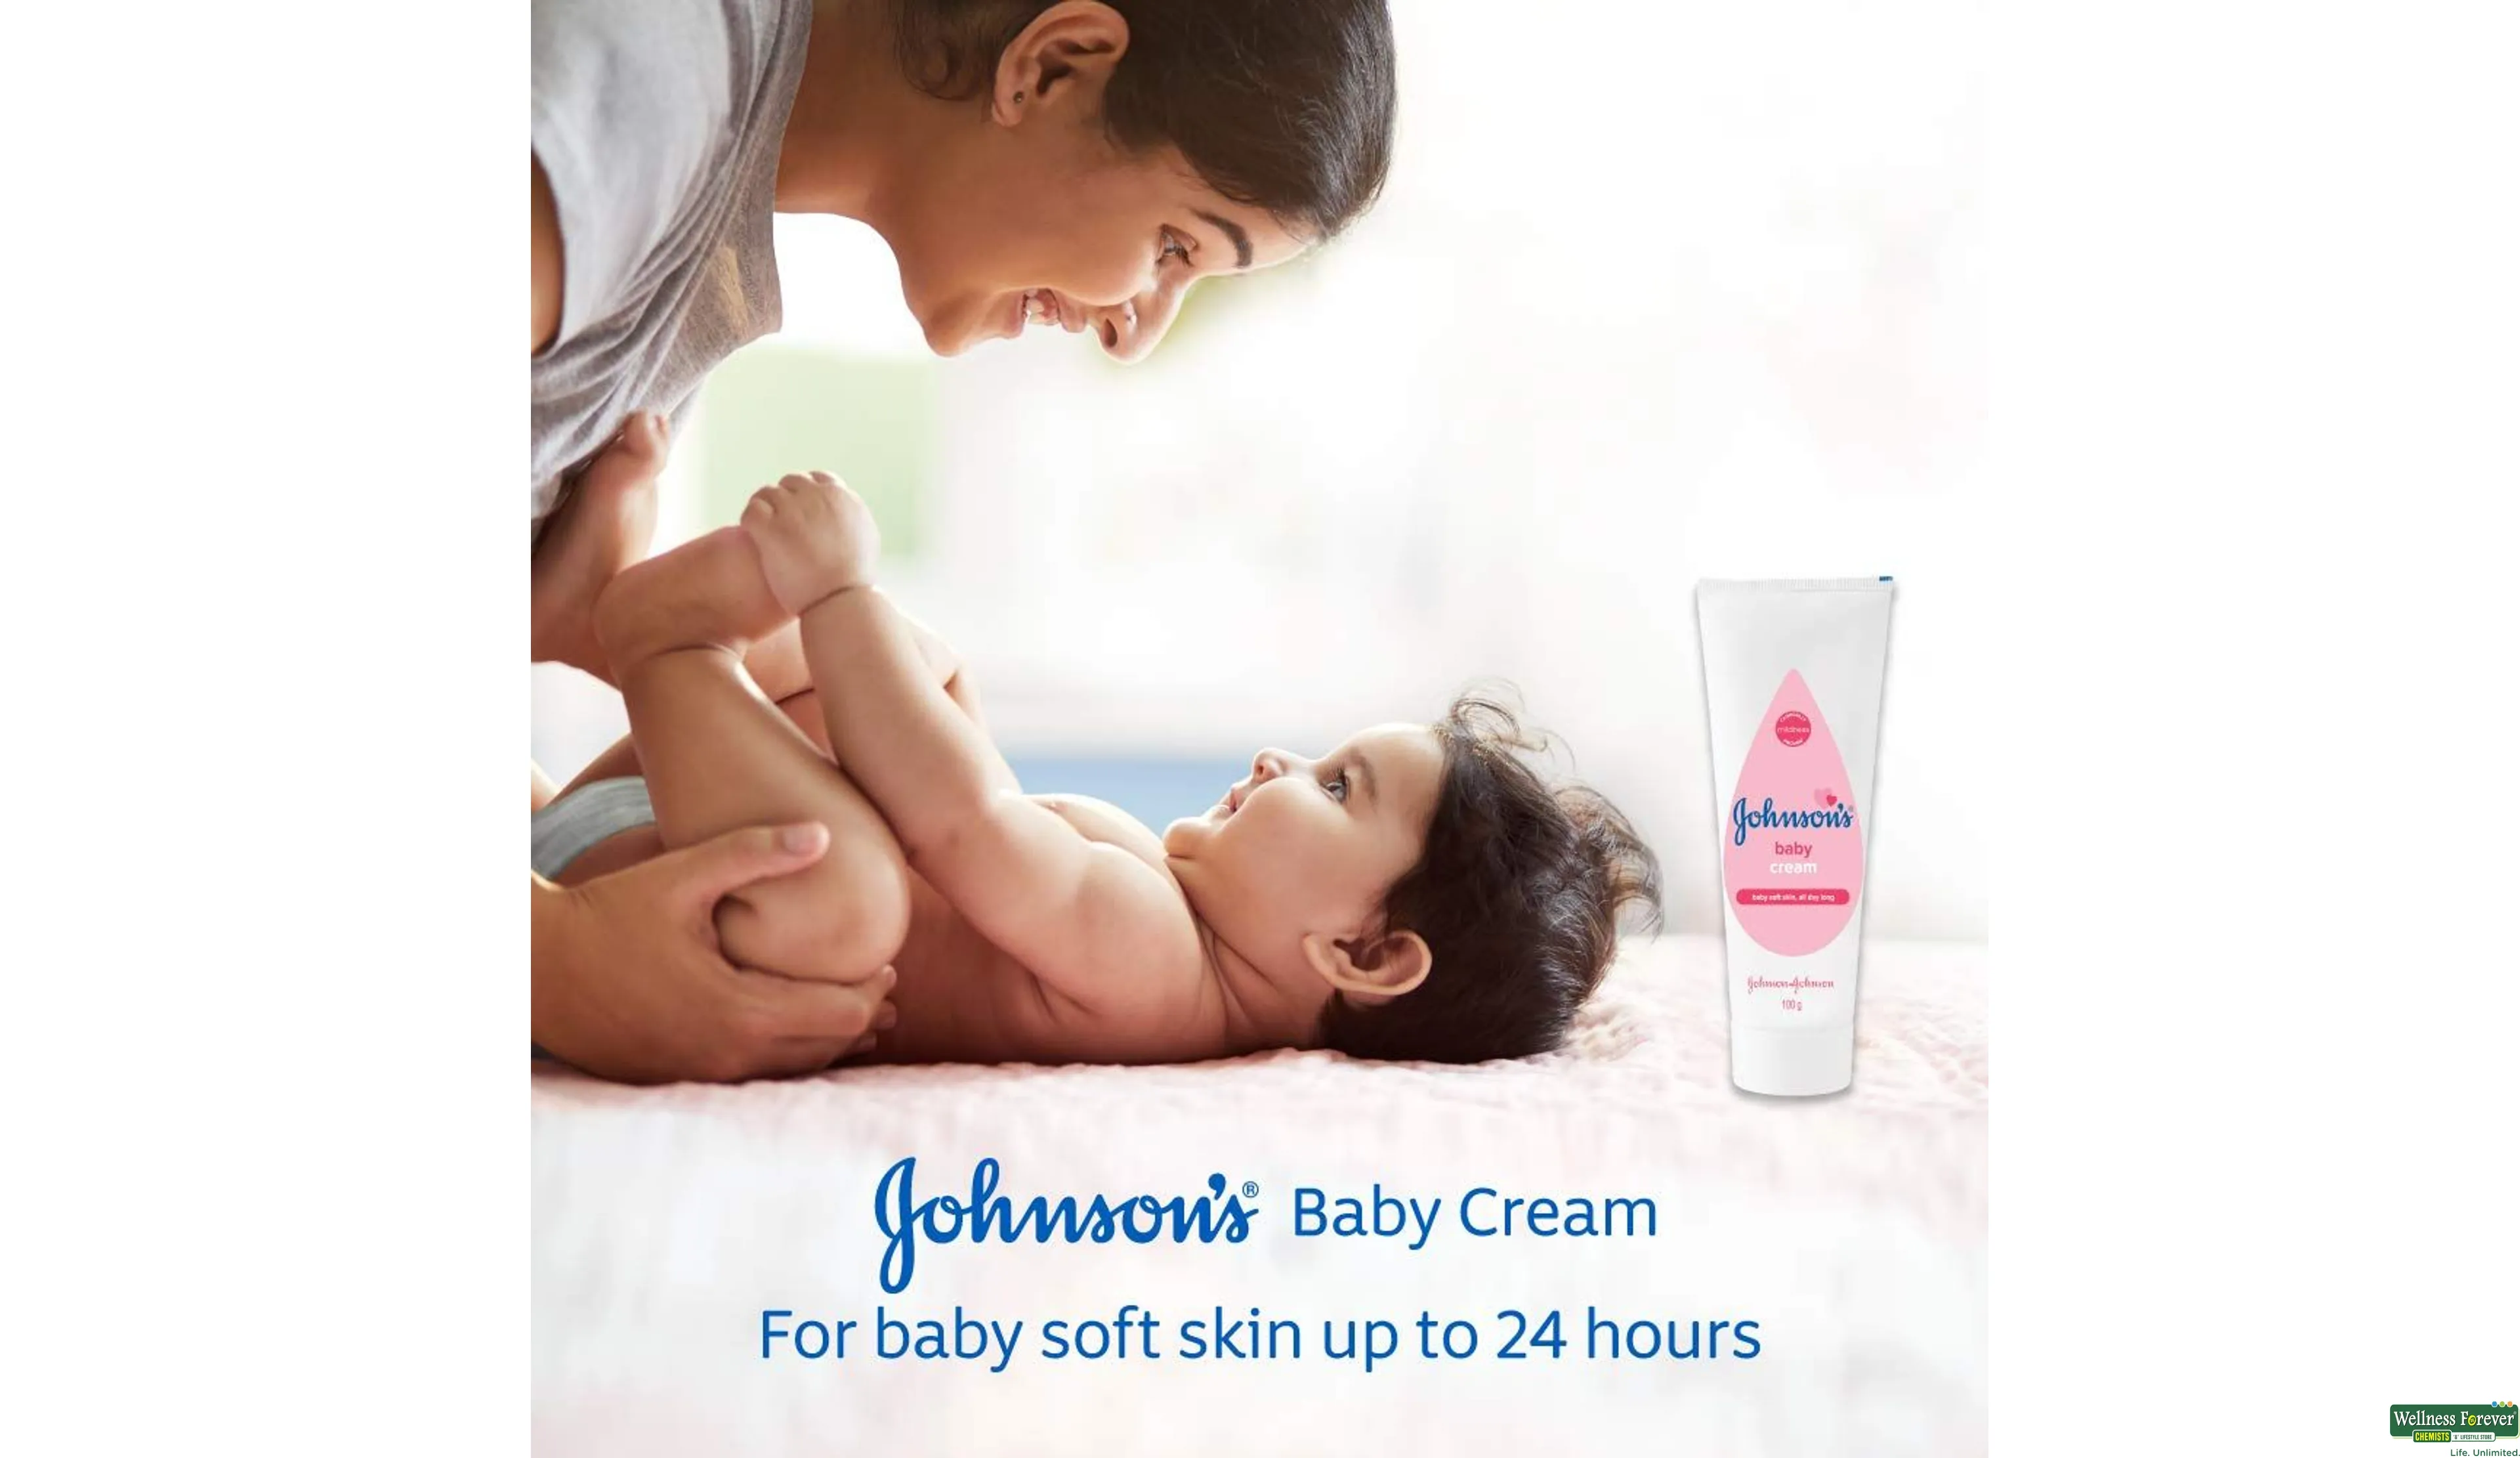 Buy Johnson's CottonTouch Newborn Baby Lotion, 500ml, Made With Natural  Cotton For Baby's Delicate Skin, pH Balanced, Hypoallergenic, Paraben Free  Moisturizer Online at Low Prices in India 